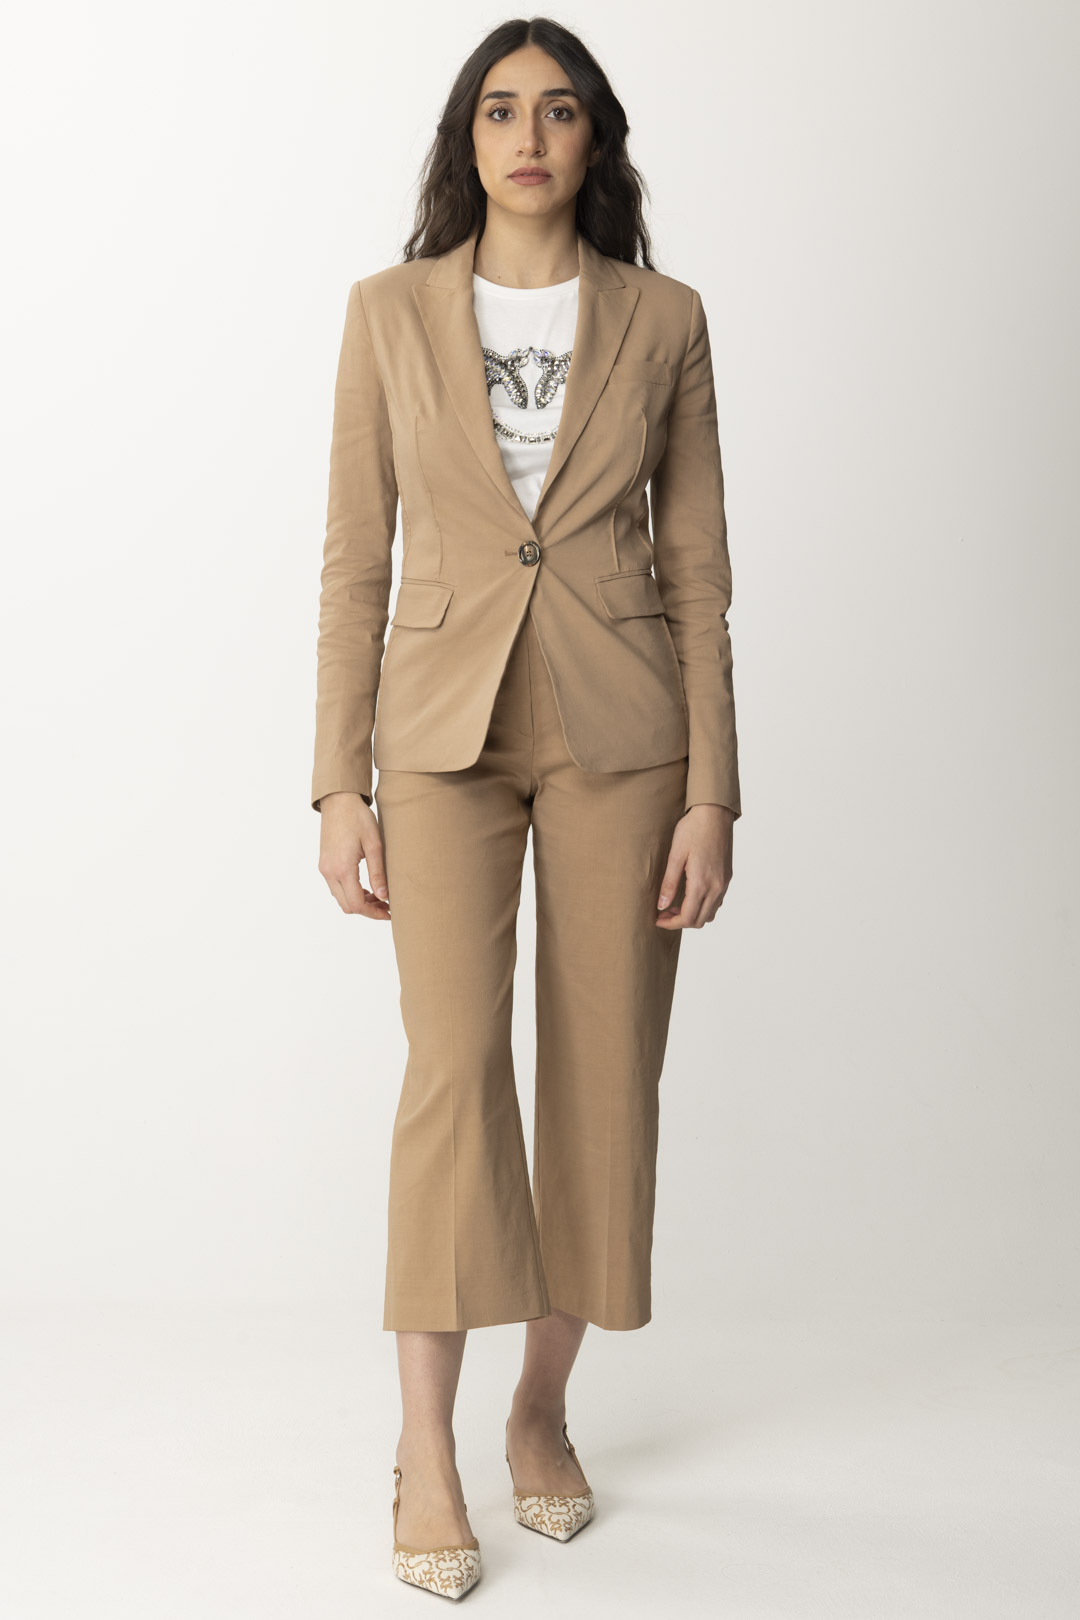 Preview: Pinko Cropped Stretch Linen Pants BEIGE BRUNO FULVO